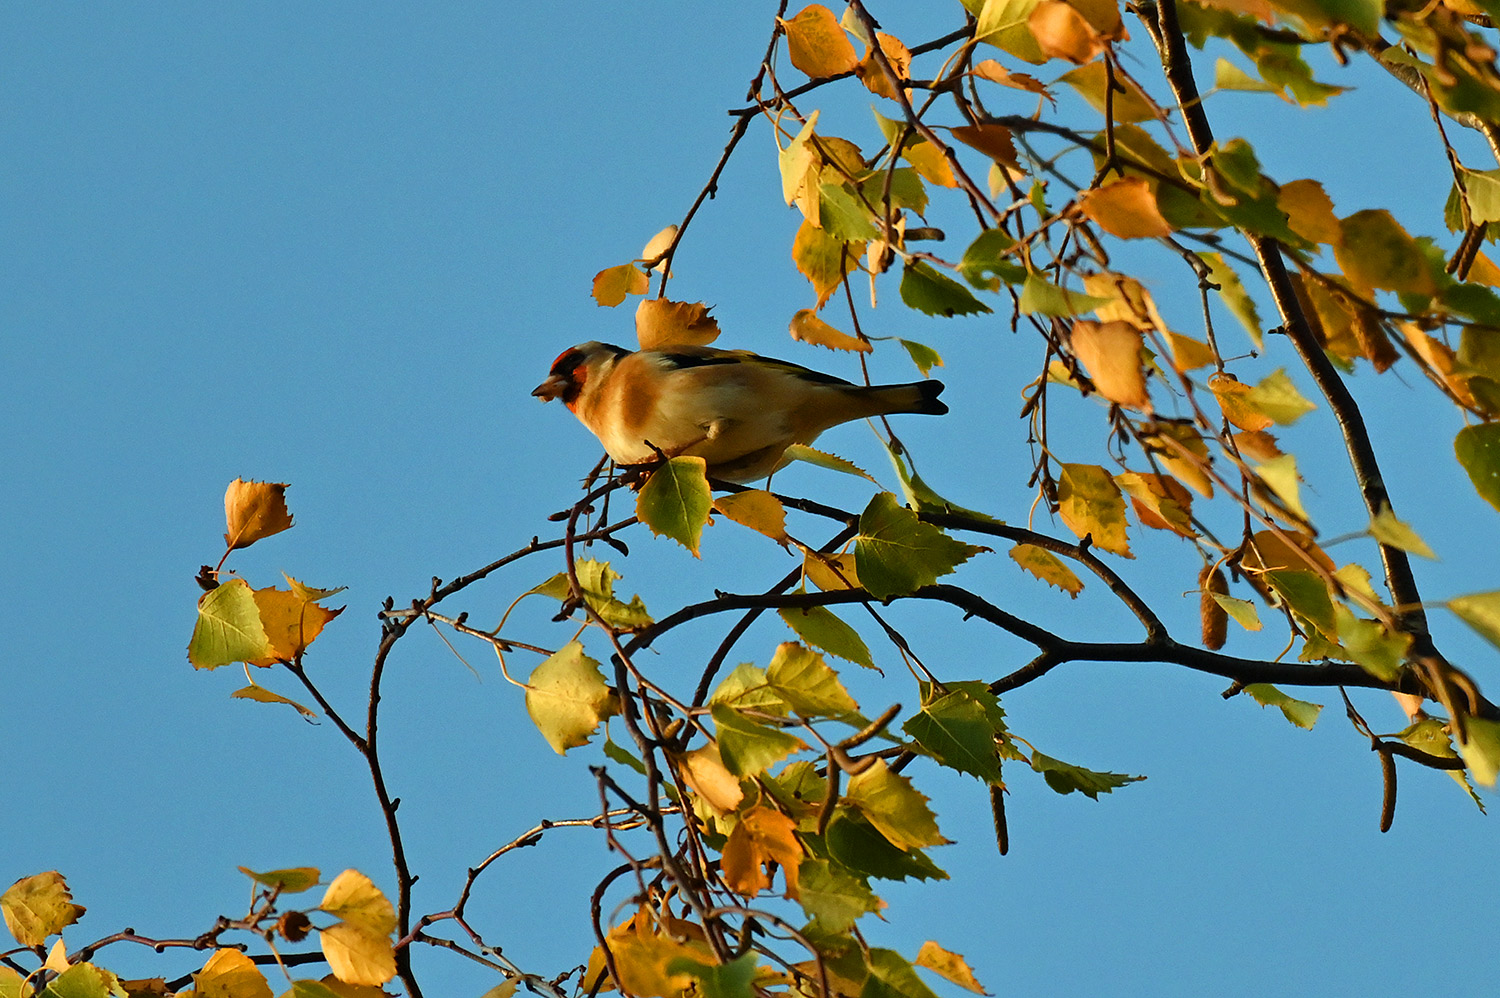 Picture of a Goldfinch in some autumn leaves under a blue sky